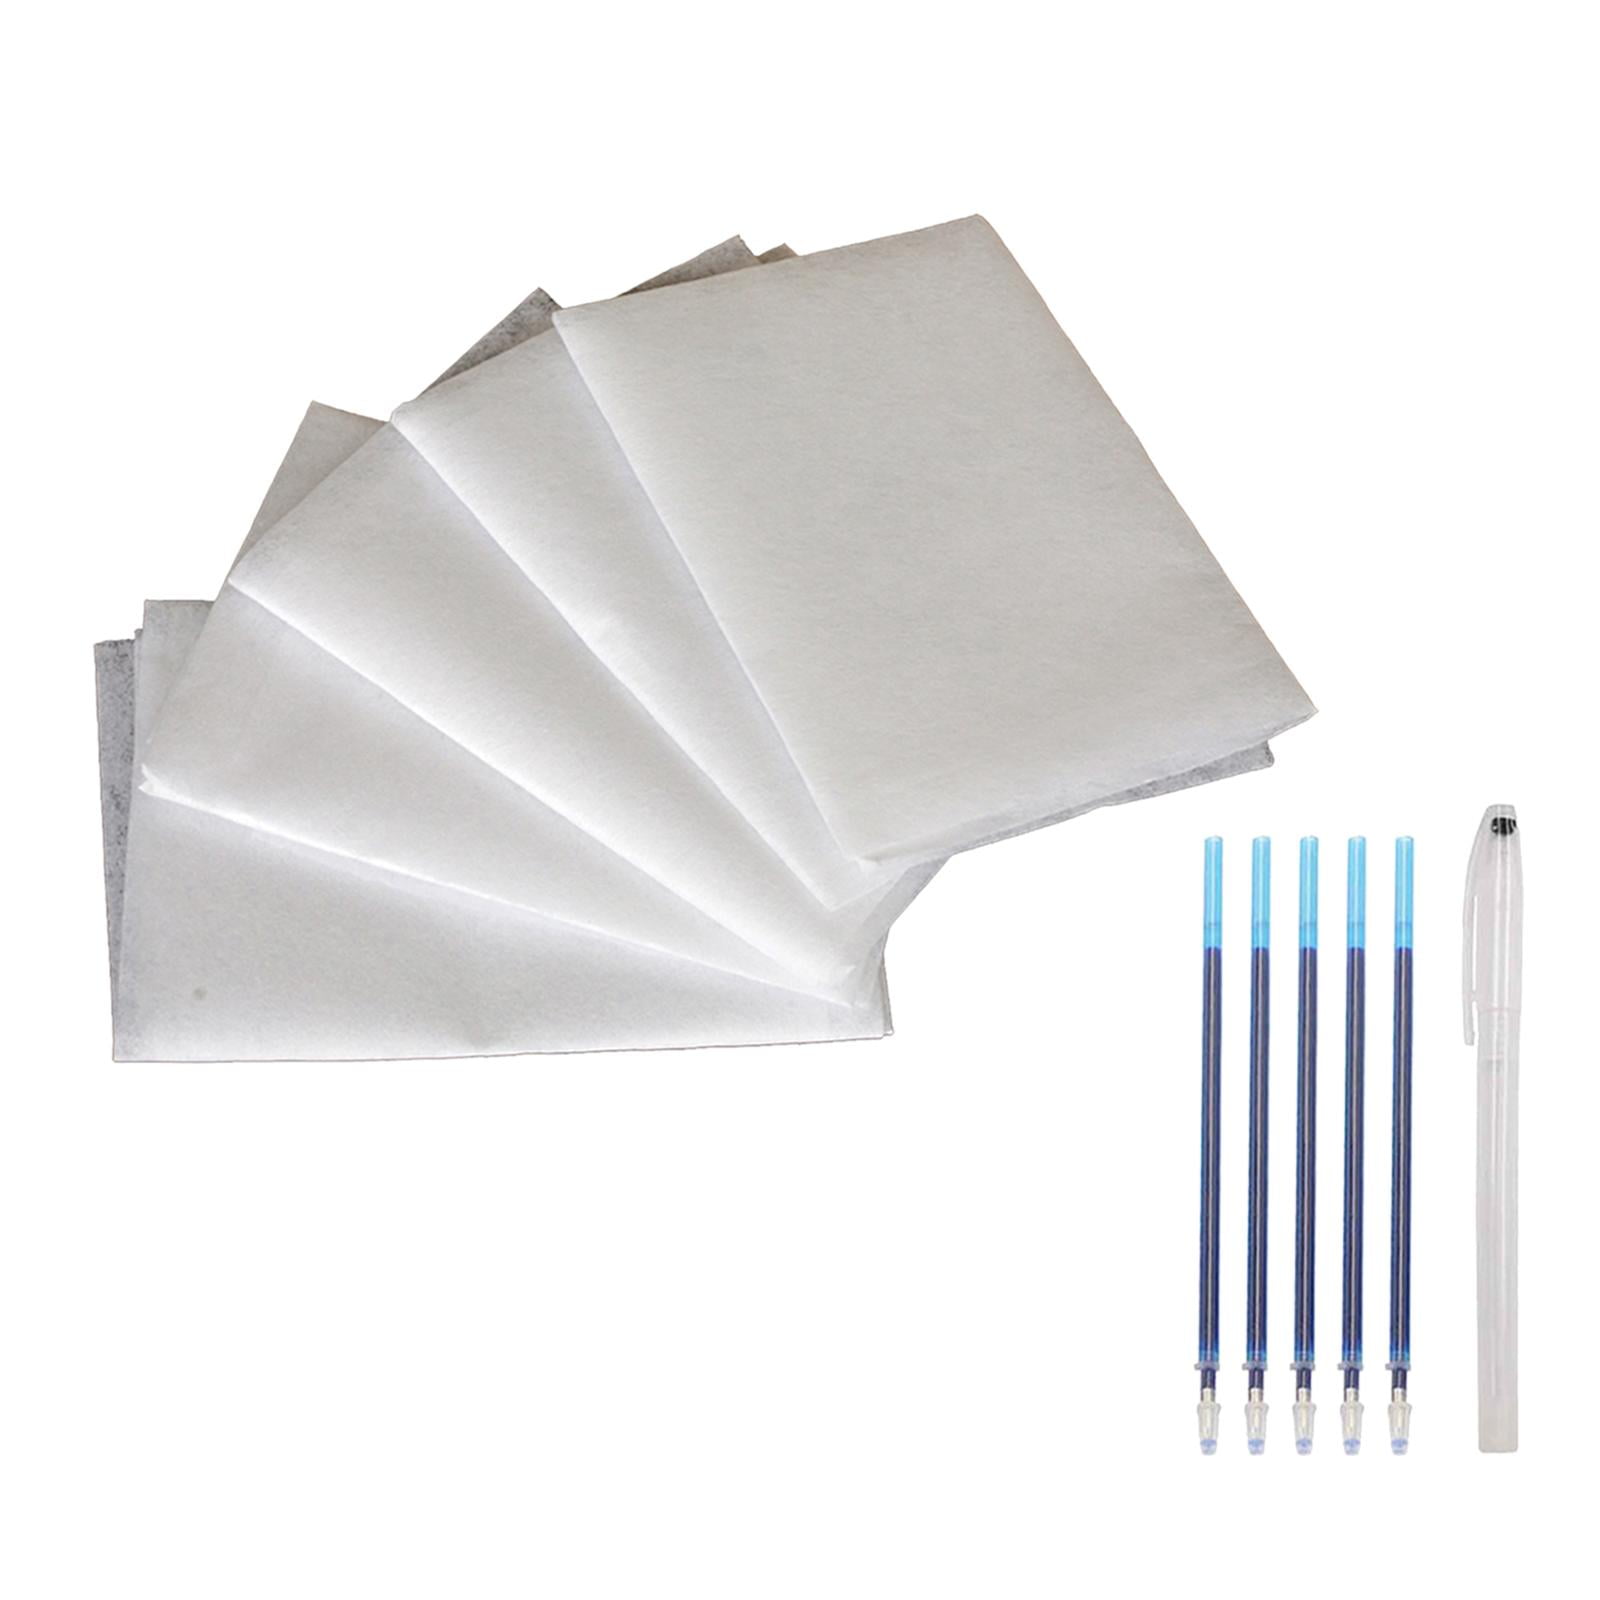 5pcs/Set DIY Sewing Tools Embroidery Transfer Paper Kit for Handmade Carbon  Water-Soluble Tracing Paper